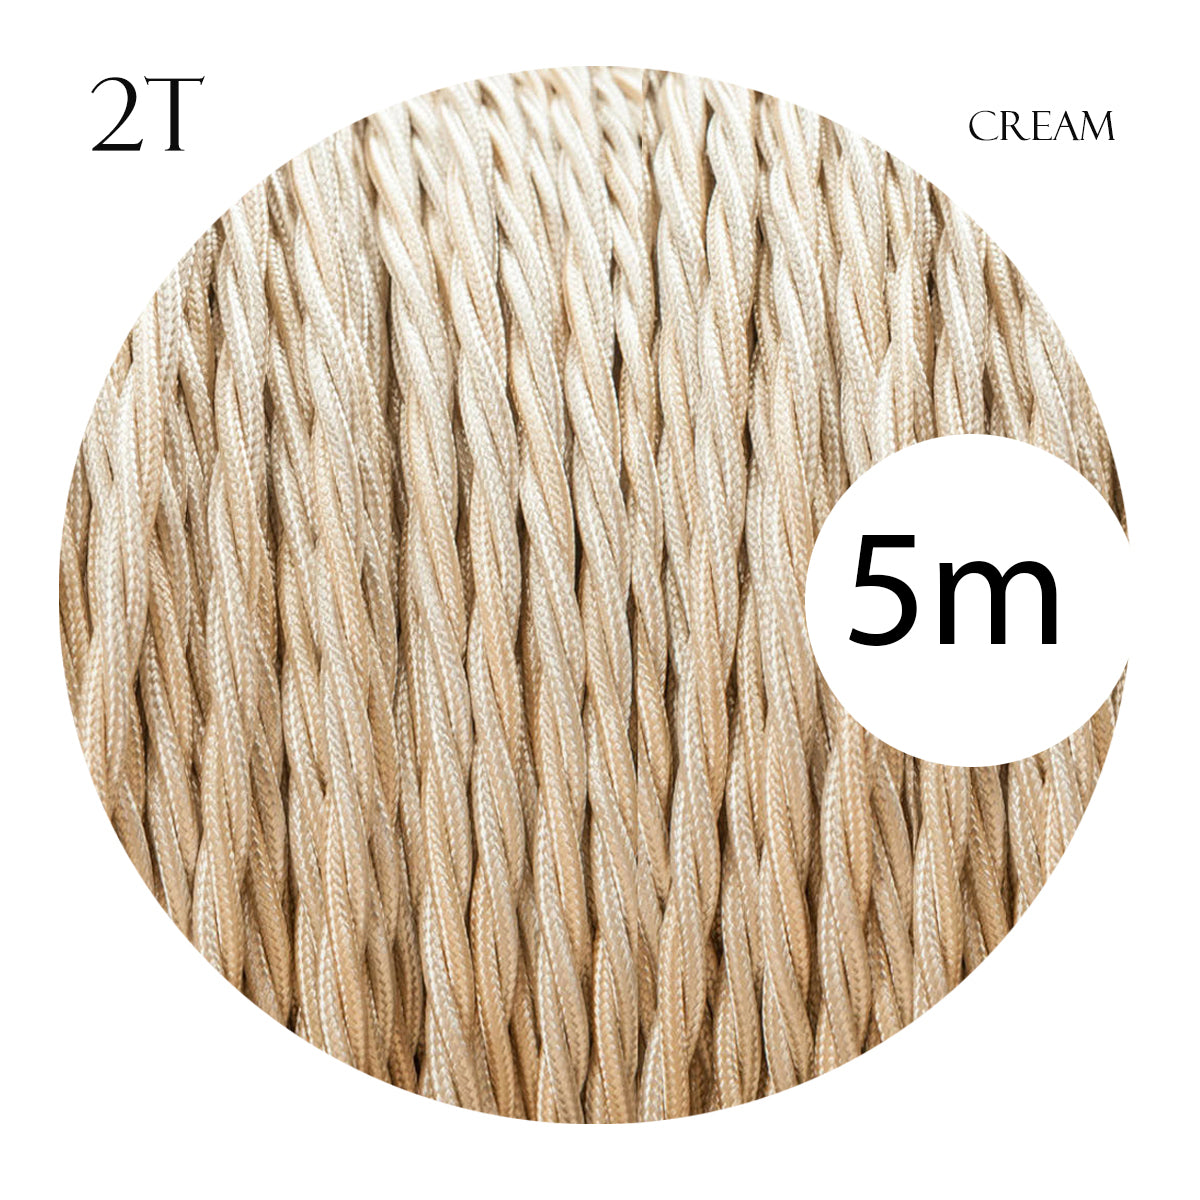 Cream color Fabric Electrical cable.JPG